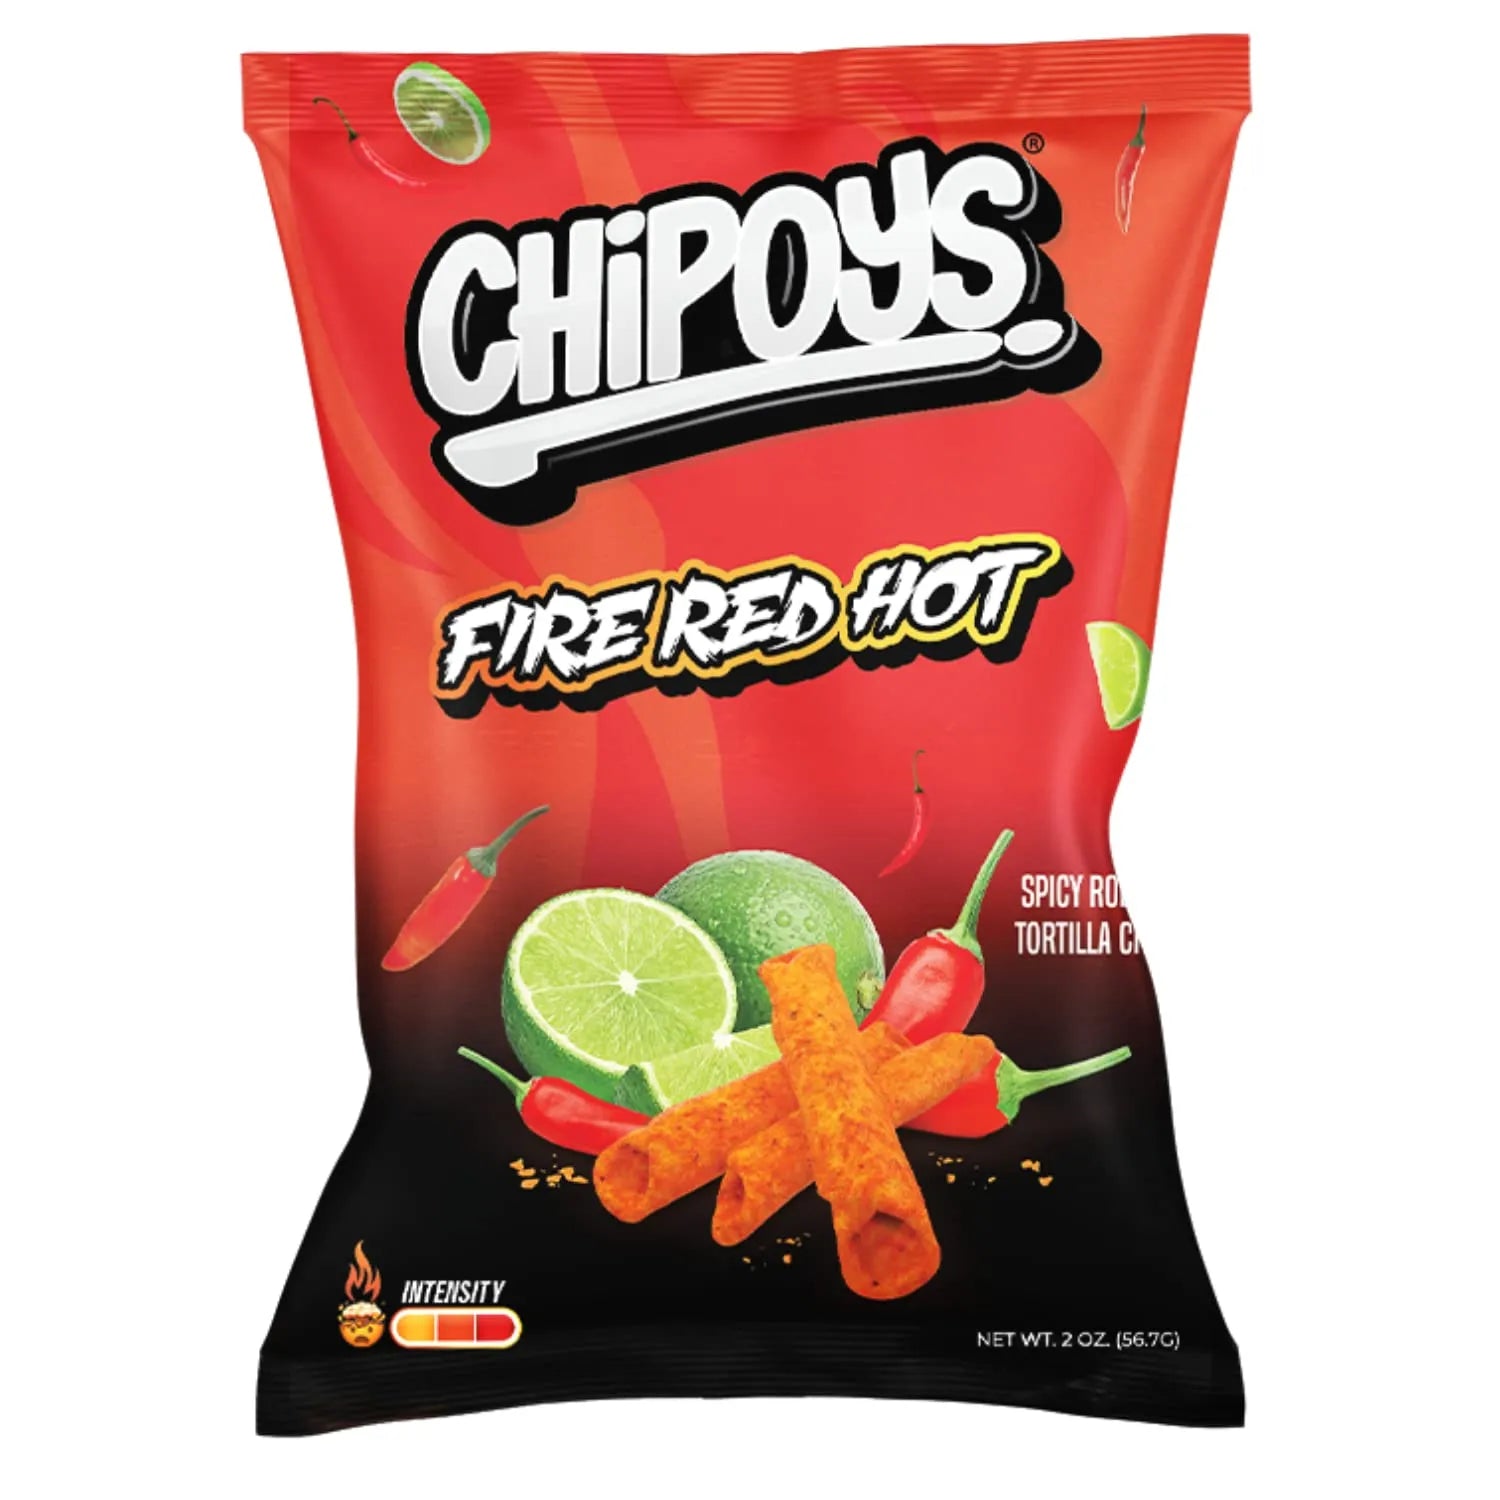 Chipoys Fire Red Hot Rolled Tortilla Corn Chips (113.46g)